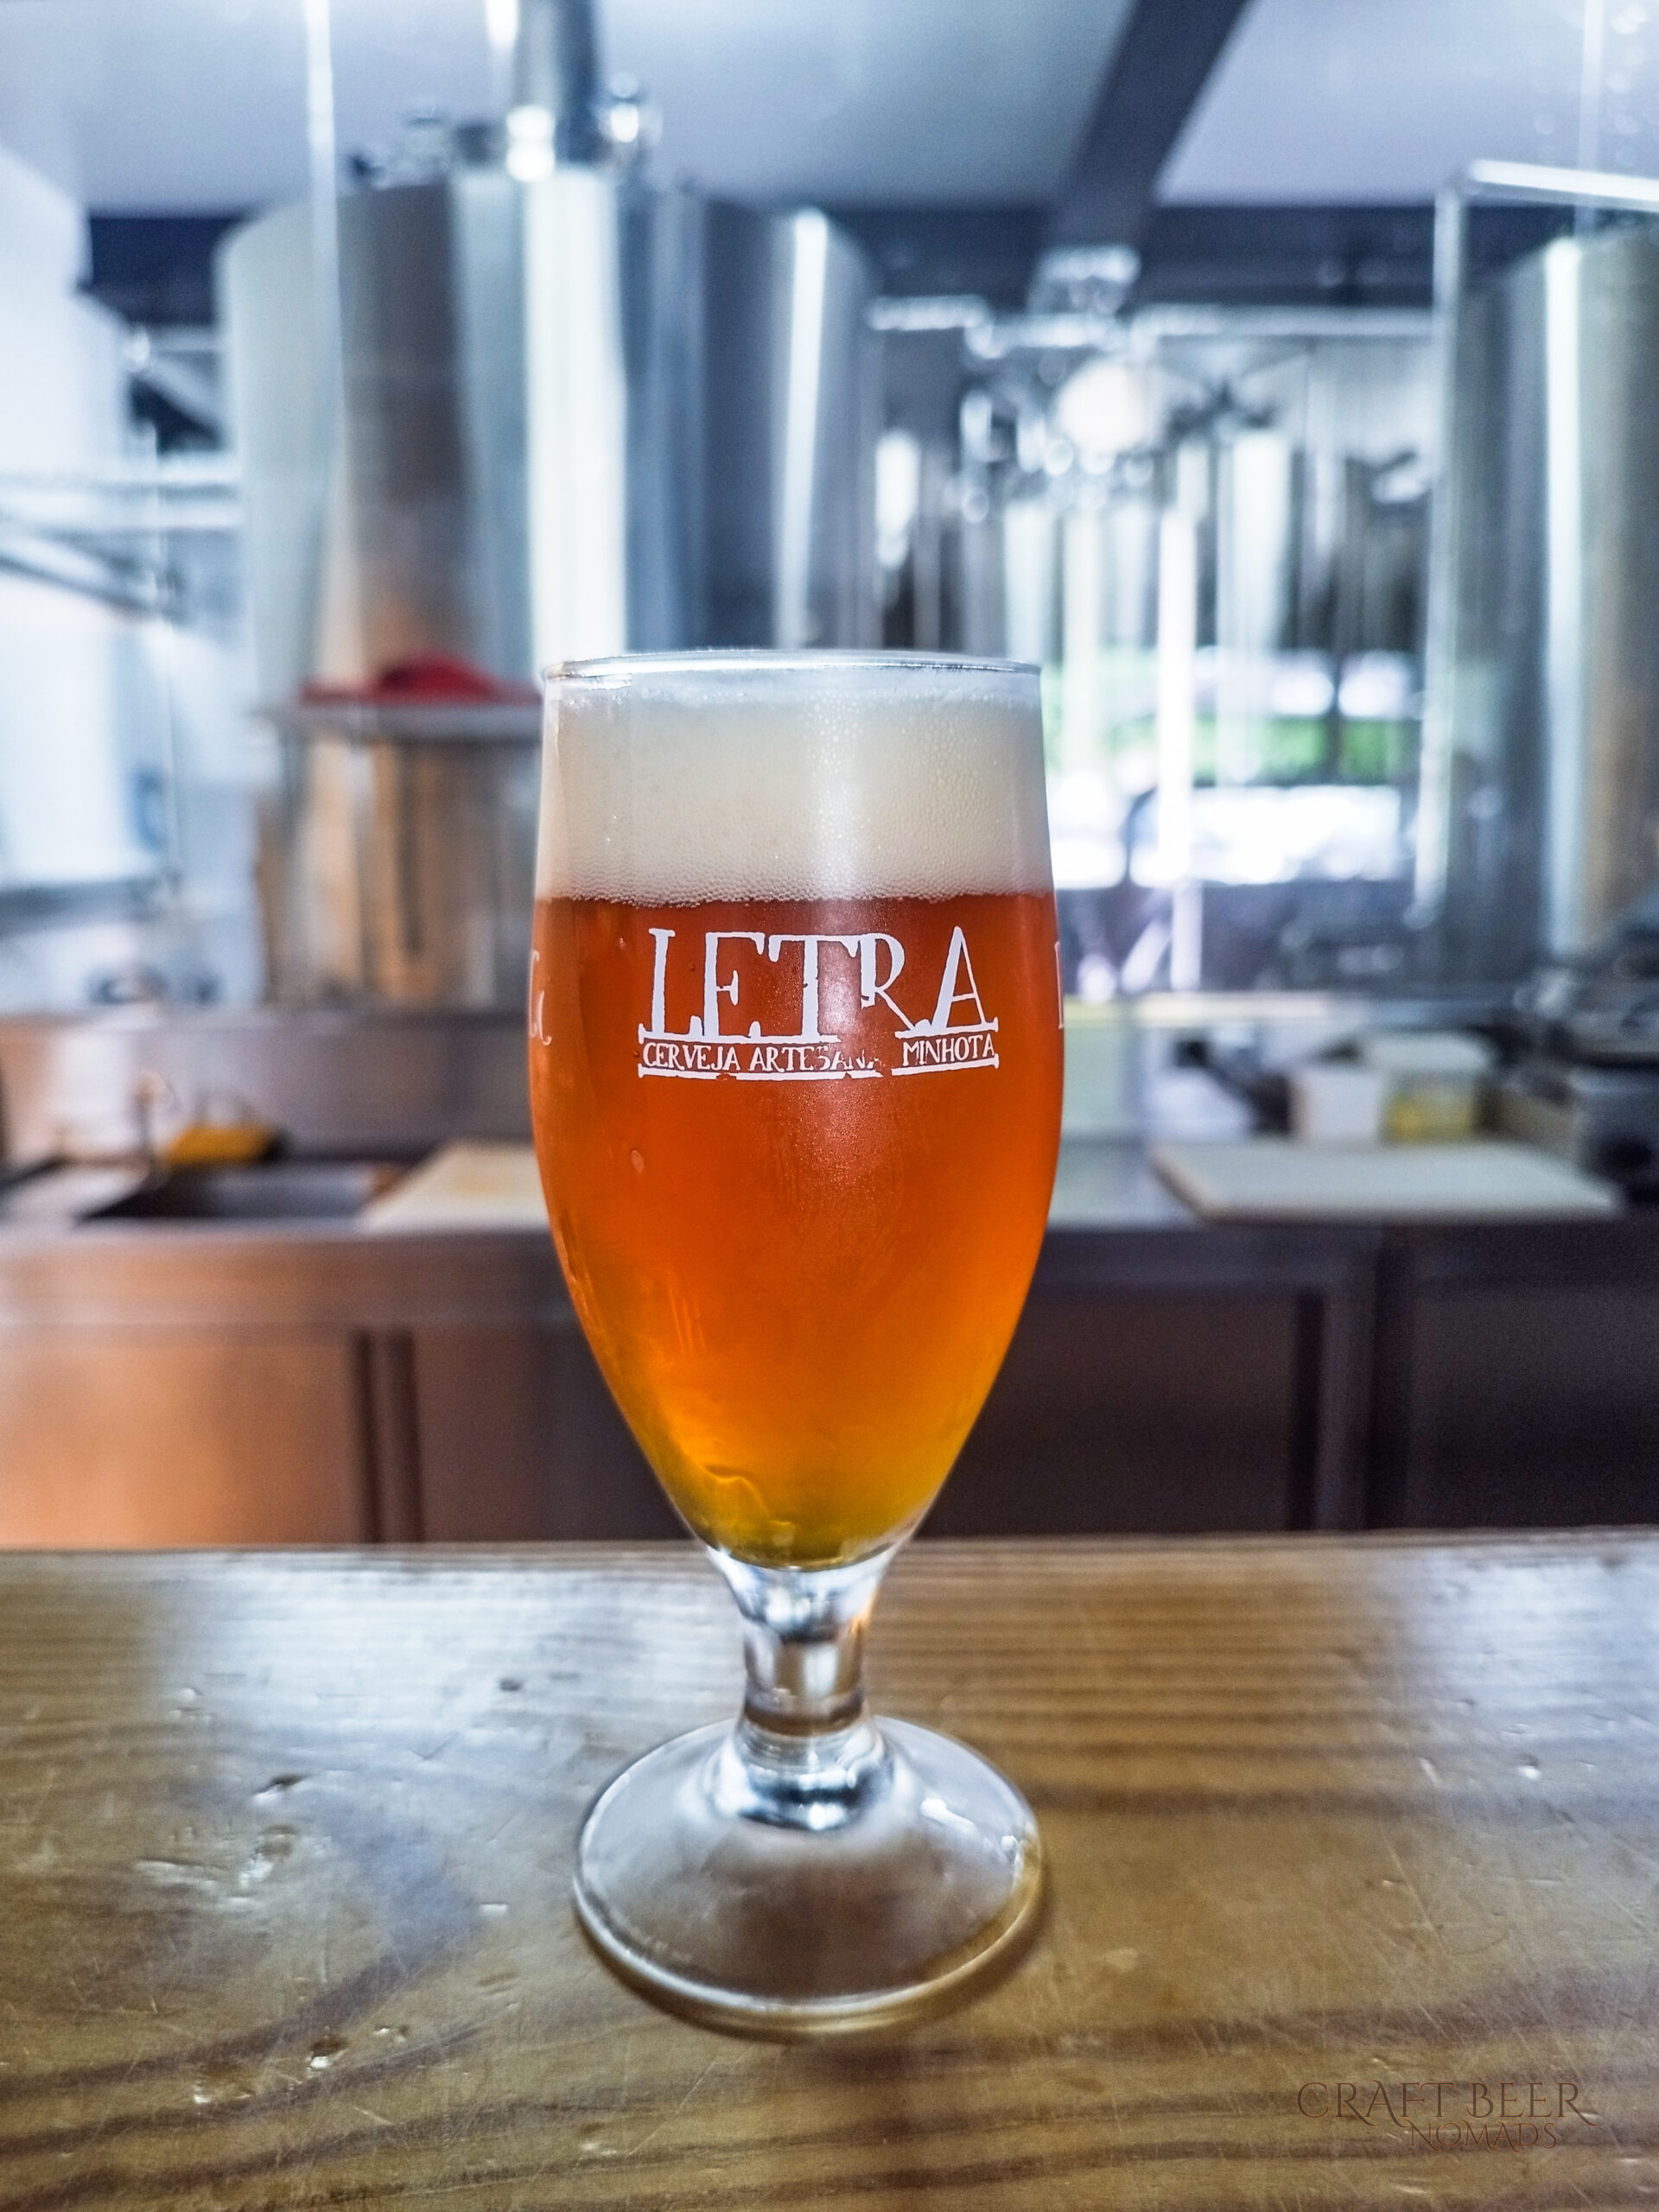 Letra F IPA | Craft beer in Portugal: Letra Brewery | Craft Beer Nomads